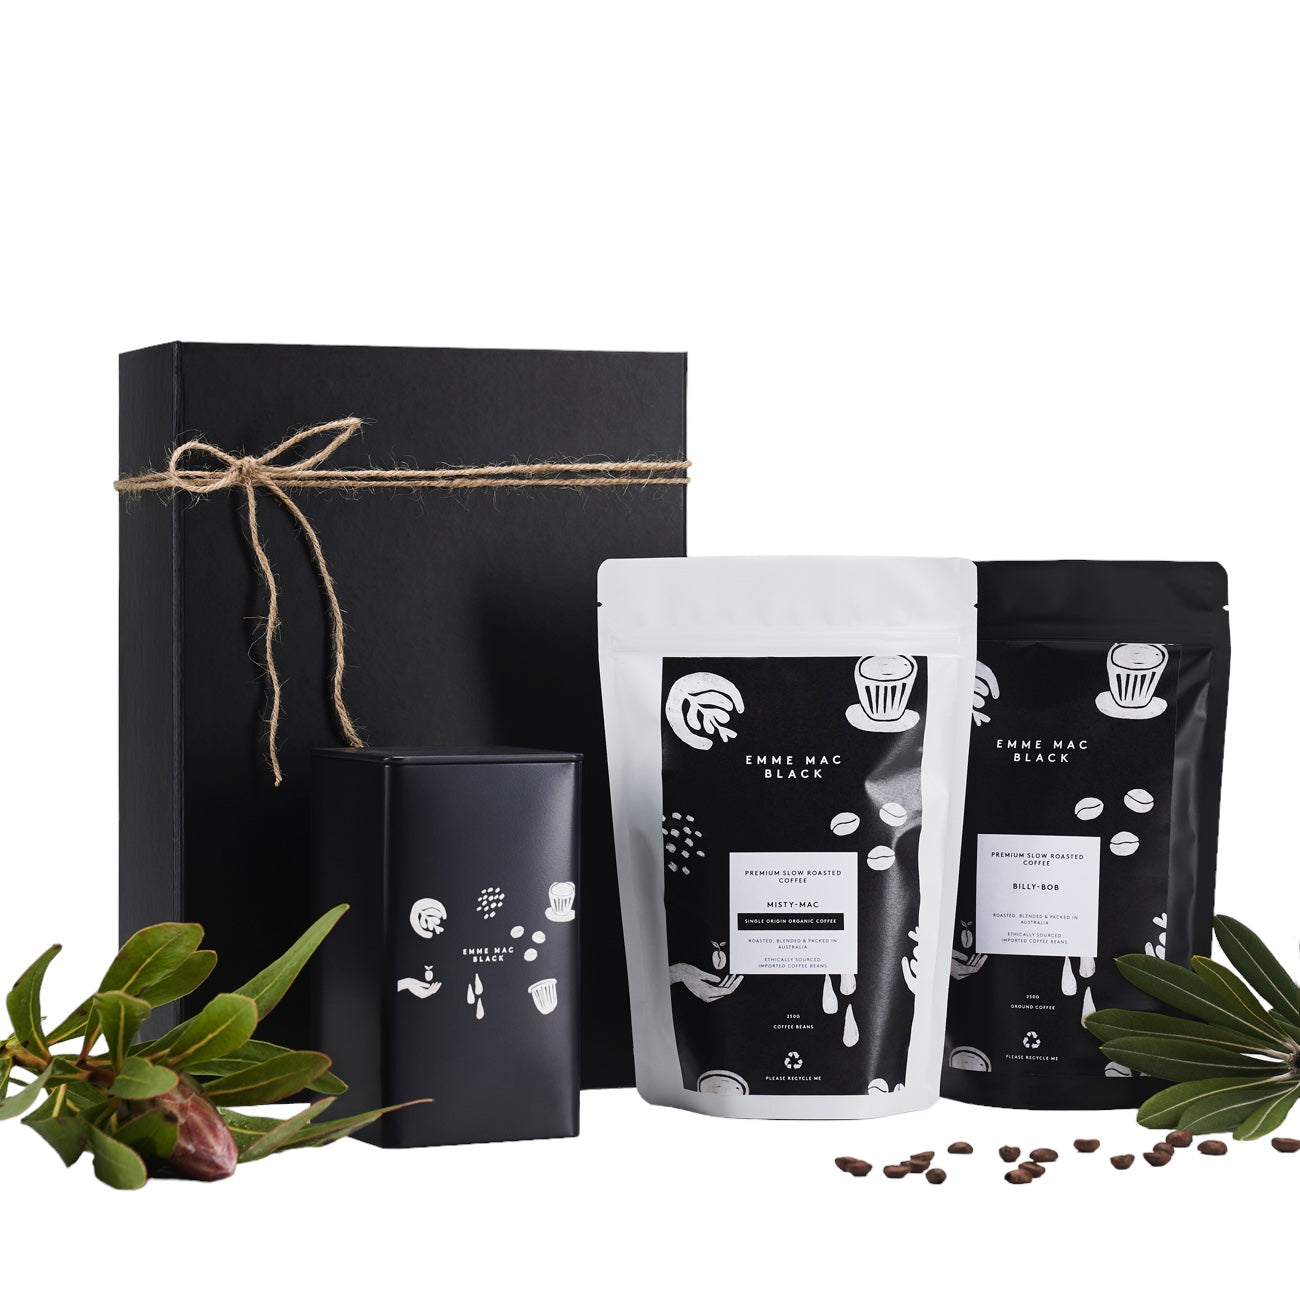 Double the Love Gift Box - Emme Mac Black